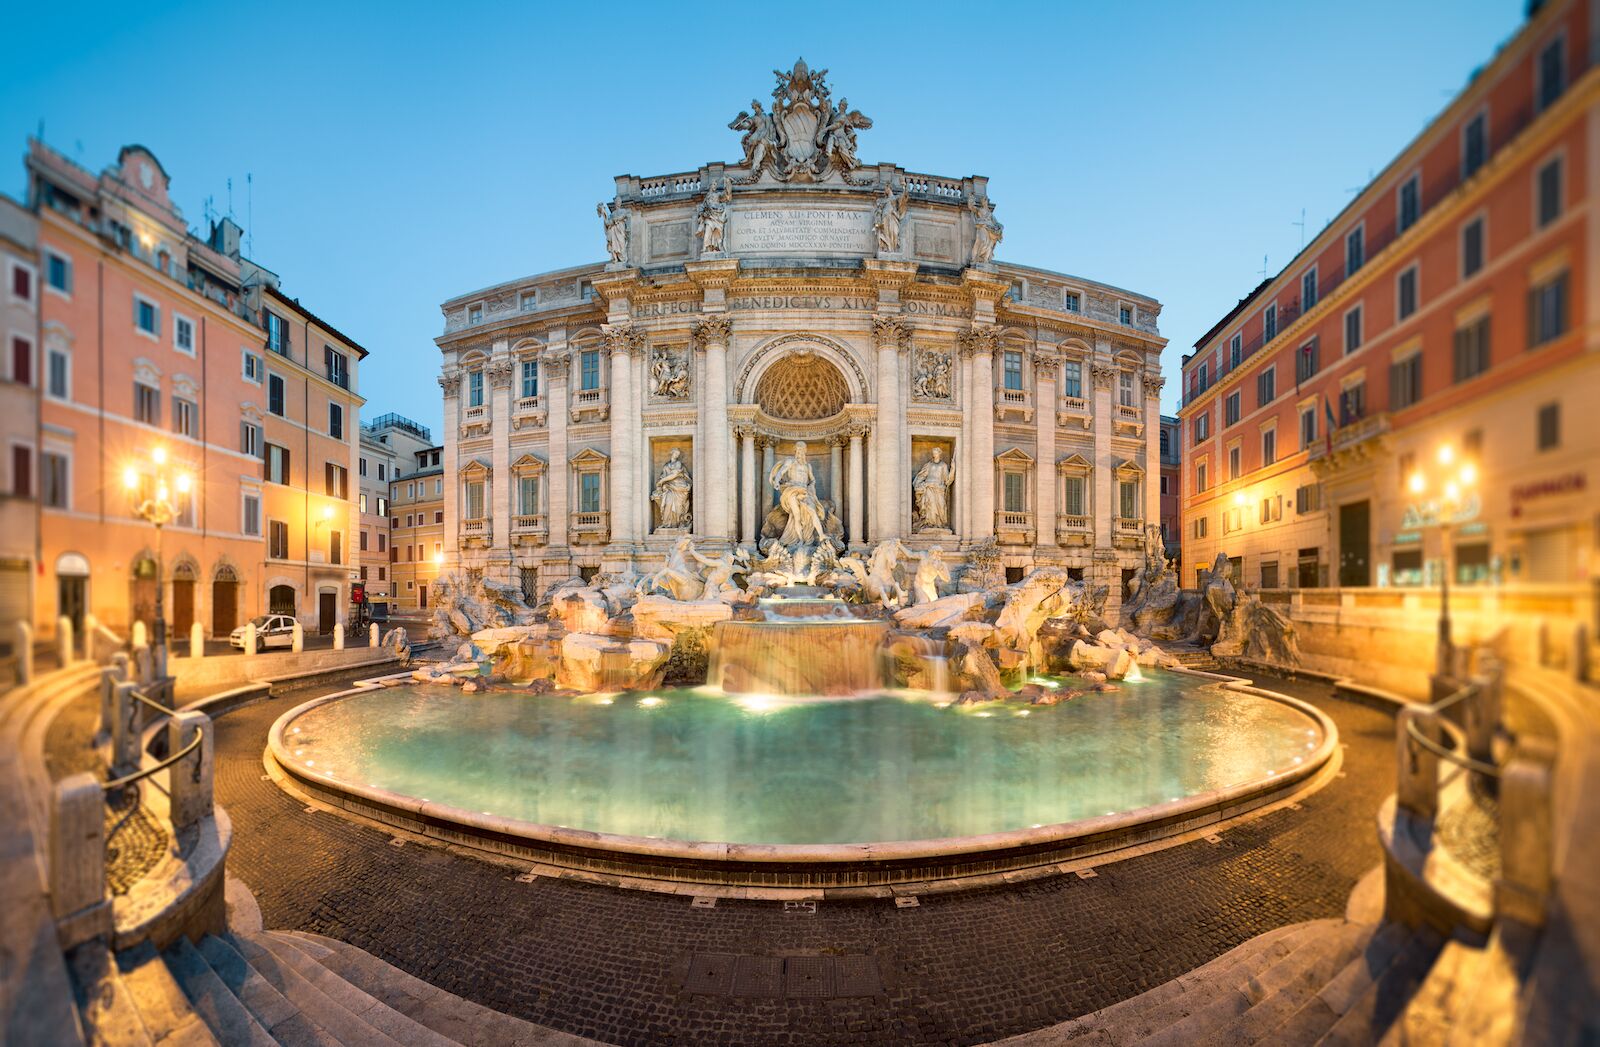 The Trevi Fountain lit up at night